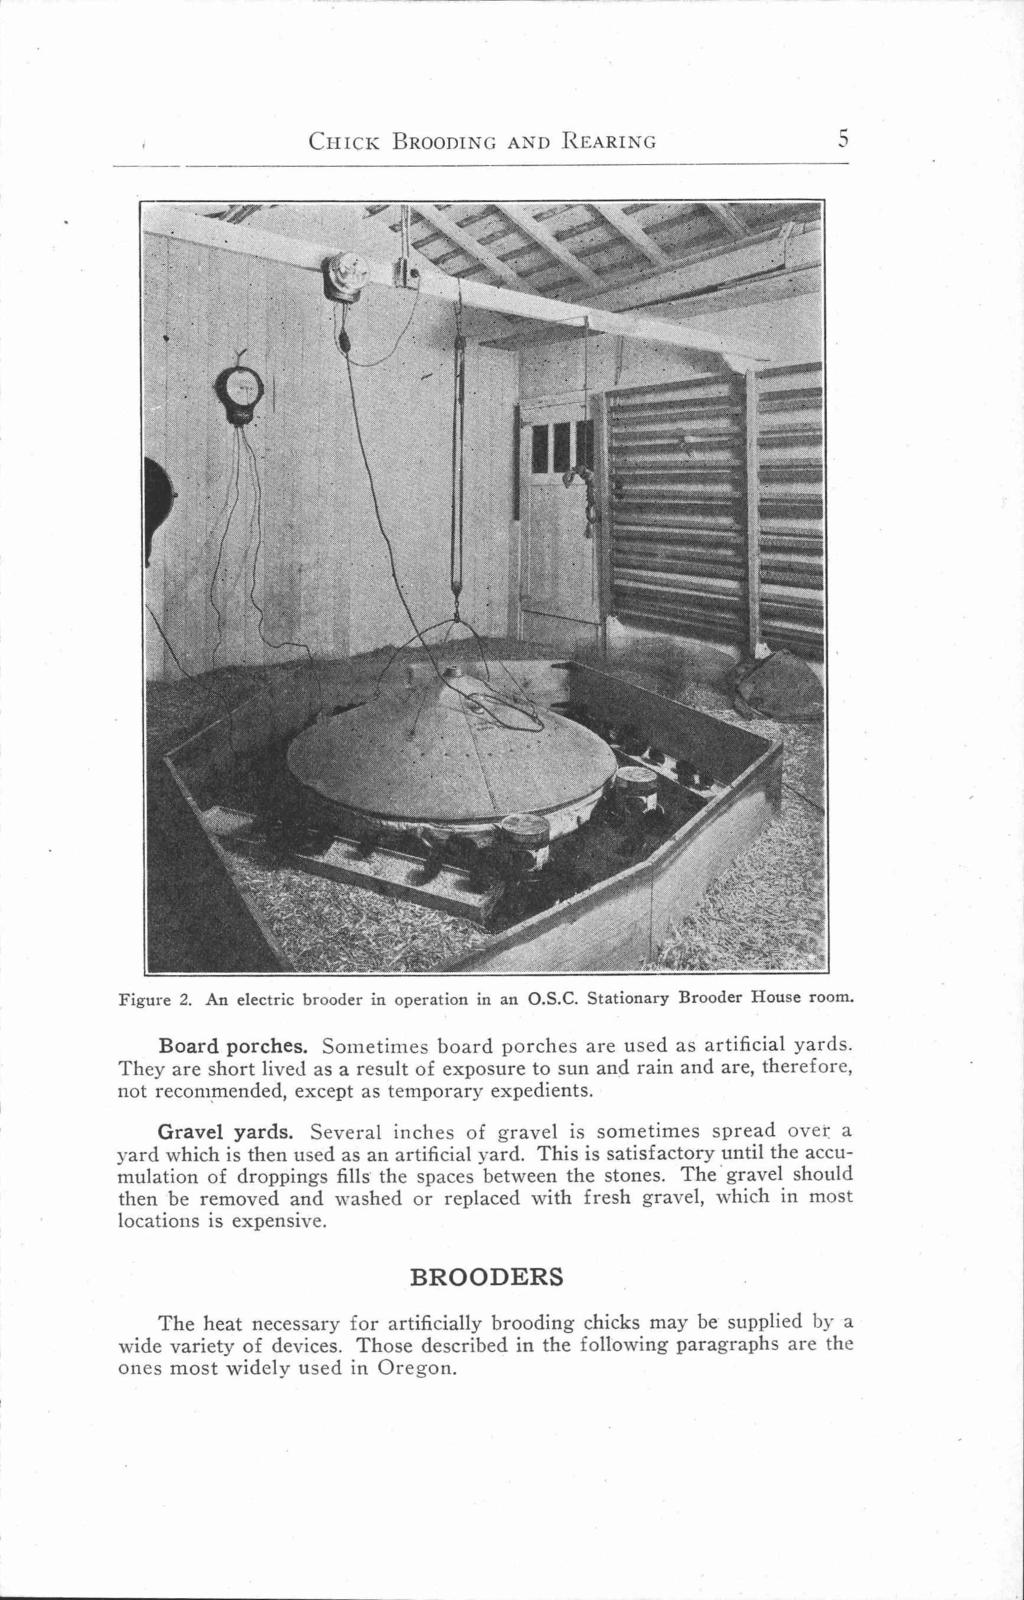 CHICK BROODING AND REARING 5 Figure 2. An electric brooder in operation in an O.S.C. Stationary Brooder House room. Board porches. Sometimes board porches are used as artificial yards.